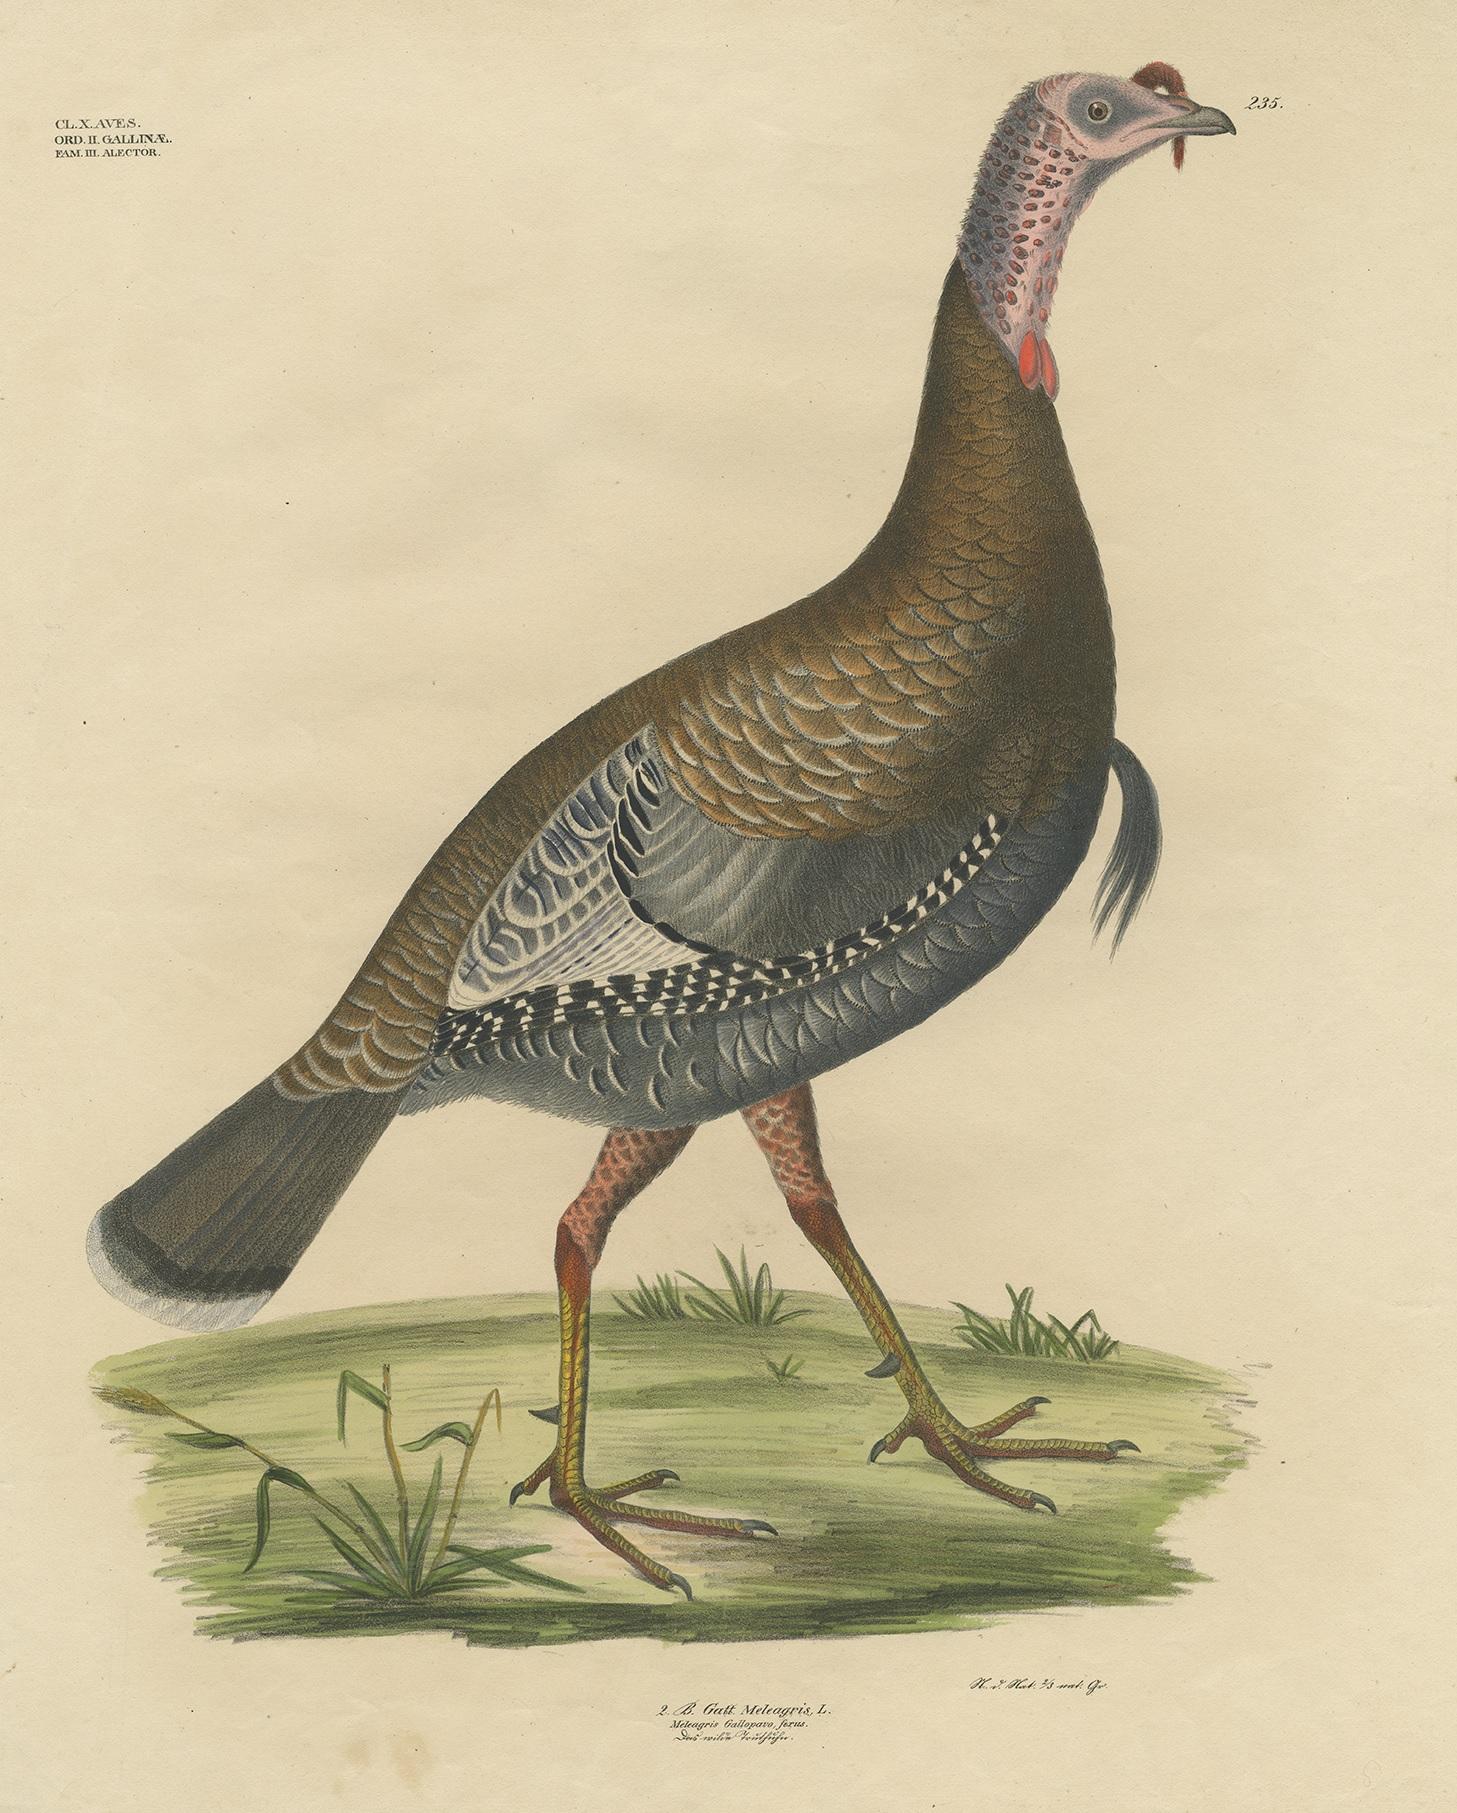 Antique bird print titled 'Gatt Meleagris'. Large lithograph of the wild turkey, an upland ground bird native to North America, one of two extant species of turkey, and the heaviest member of the diverse Galliformes. It is the same species as the